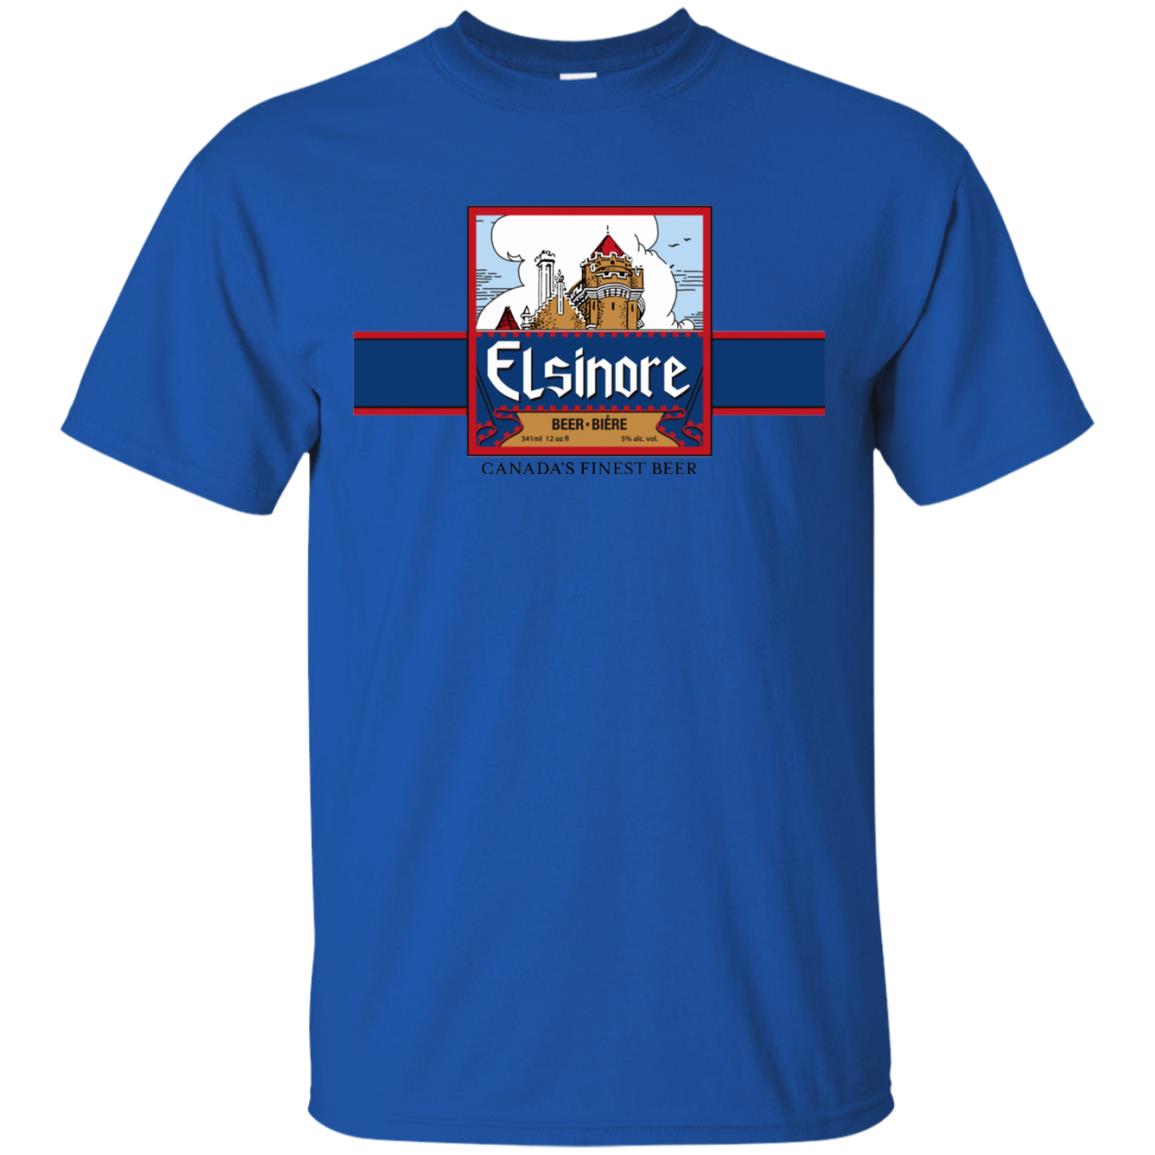 elsinore brewery t shirt